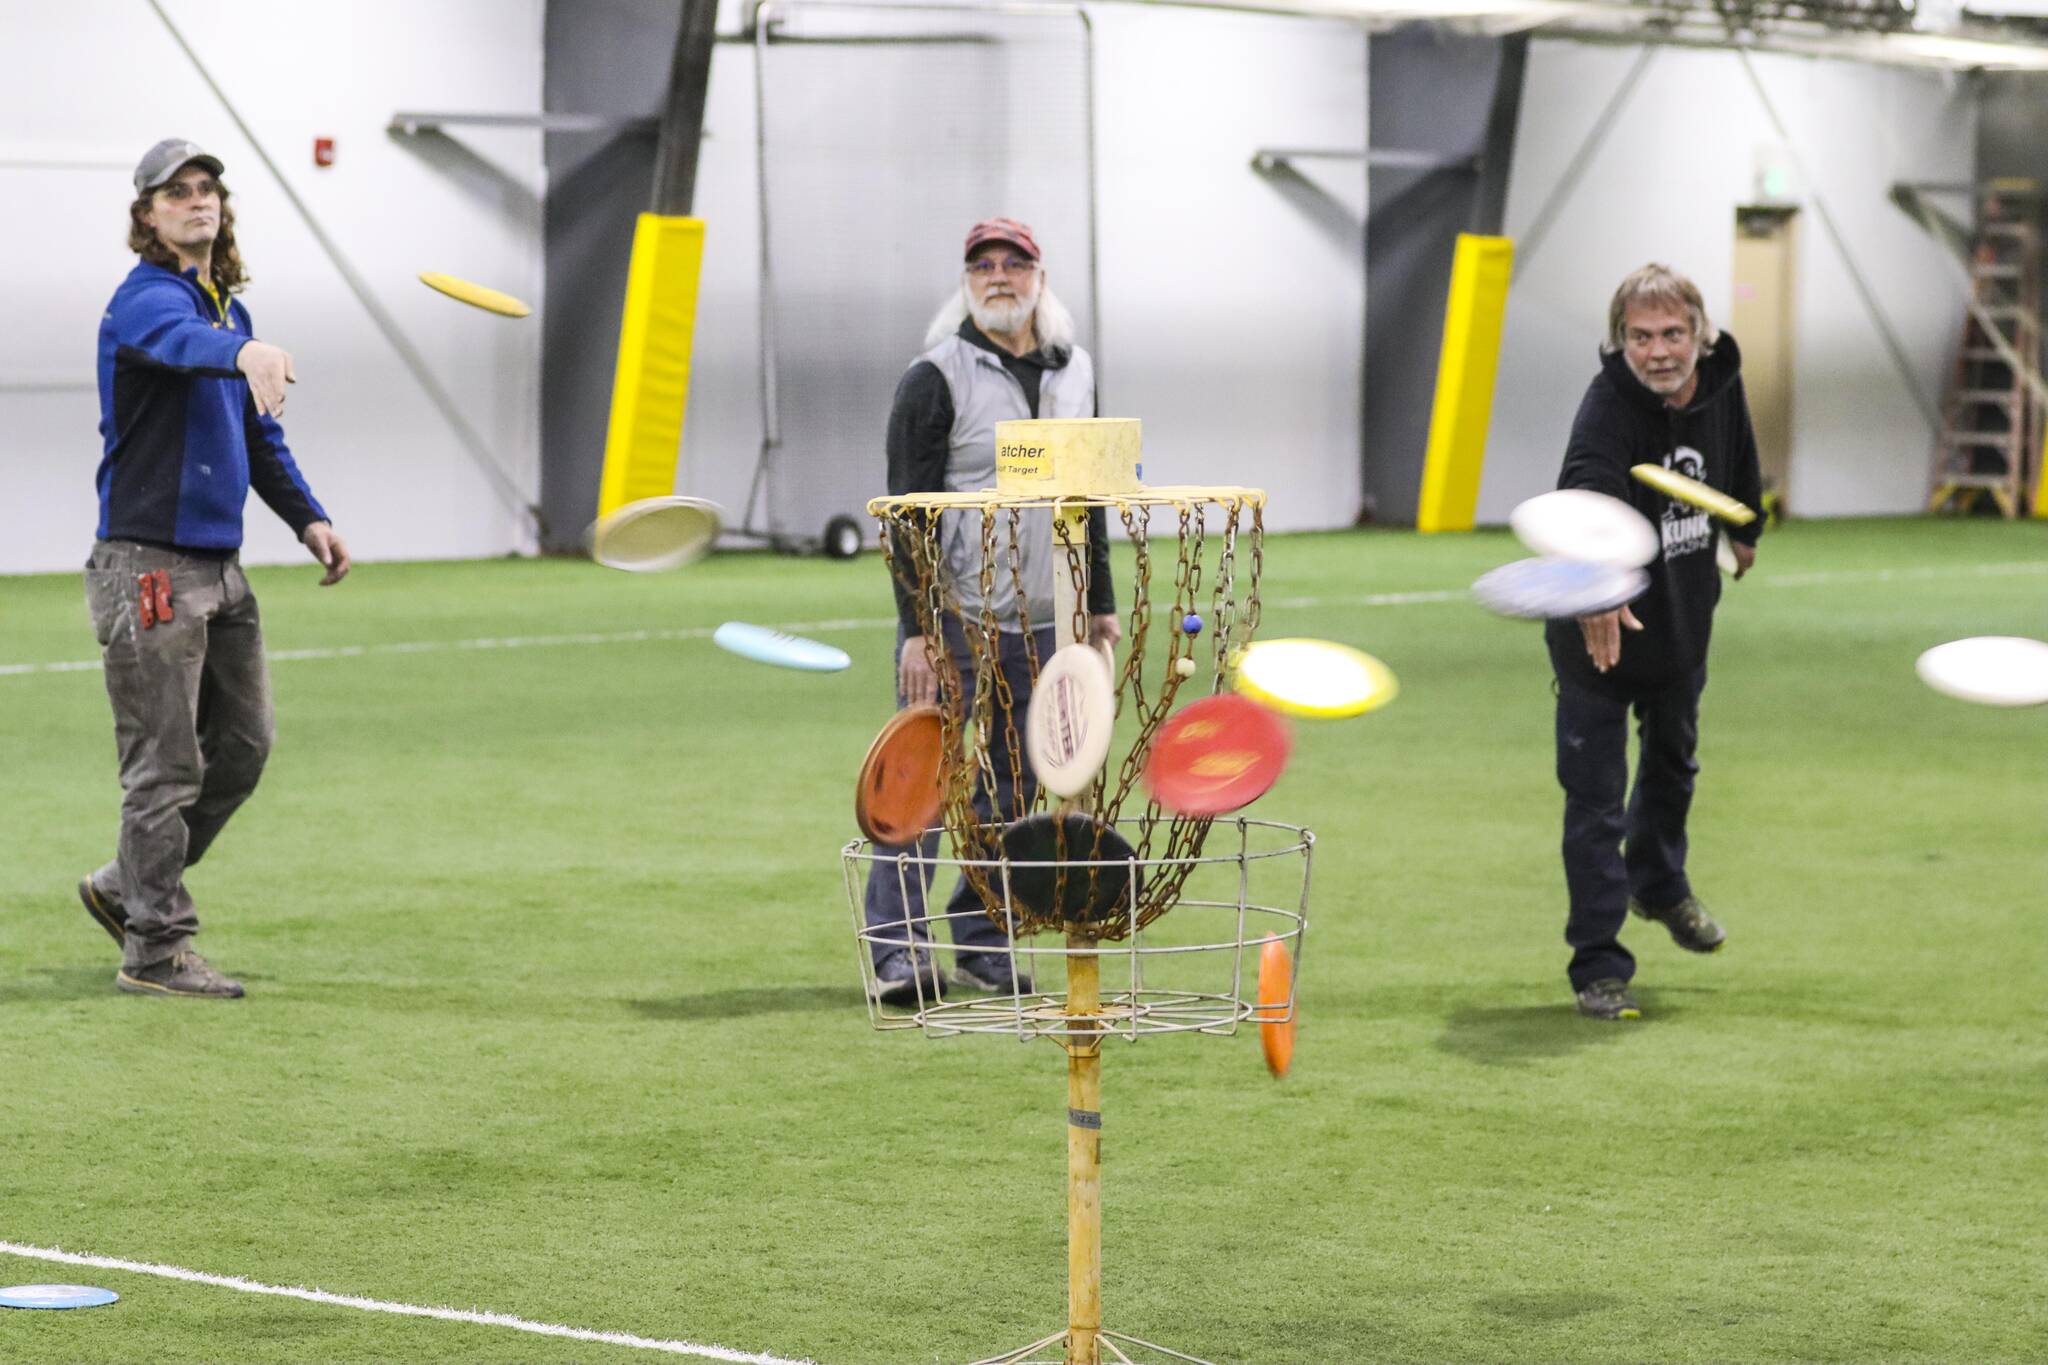 Michael S. Lockett / Juneau Empire
Players at a disc golf community workshop held by Uplay throw discs at the target at Dimond Park Field House on May 12, 2022.